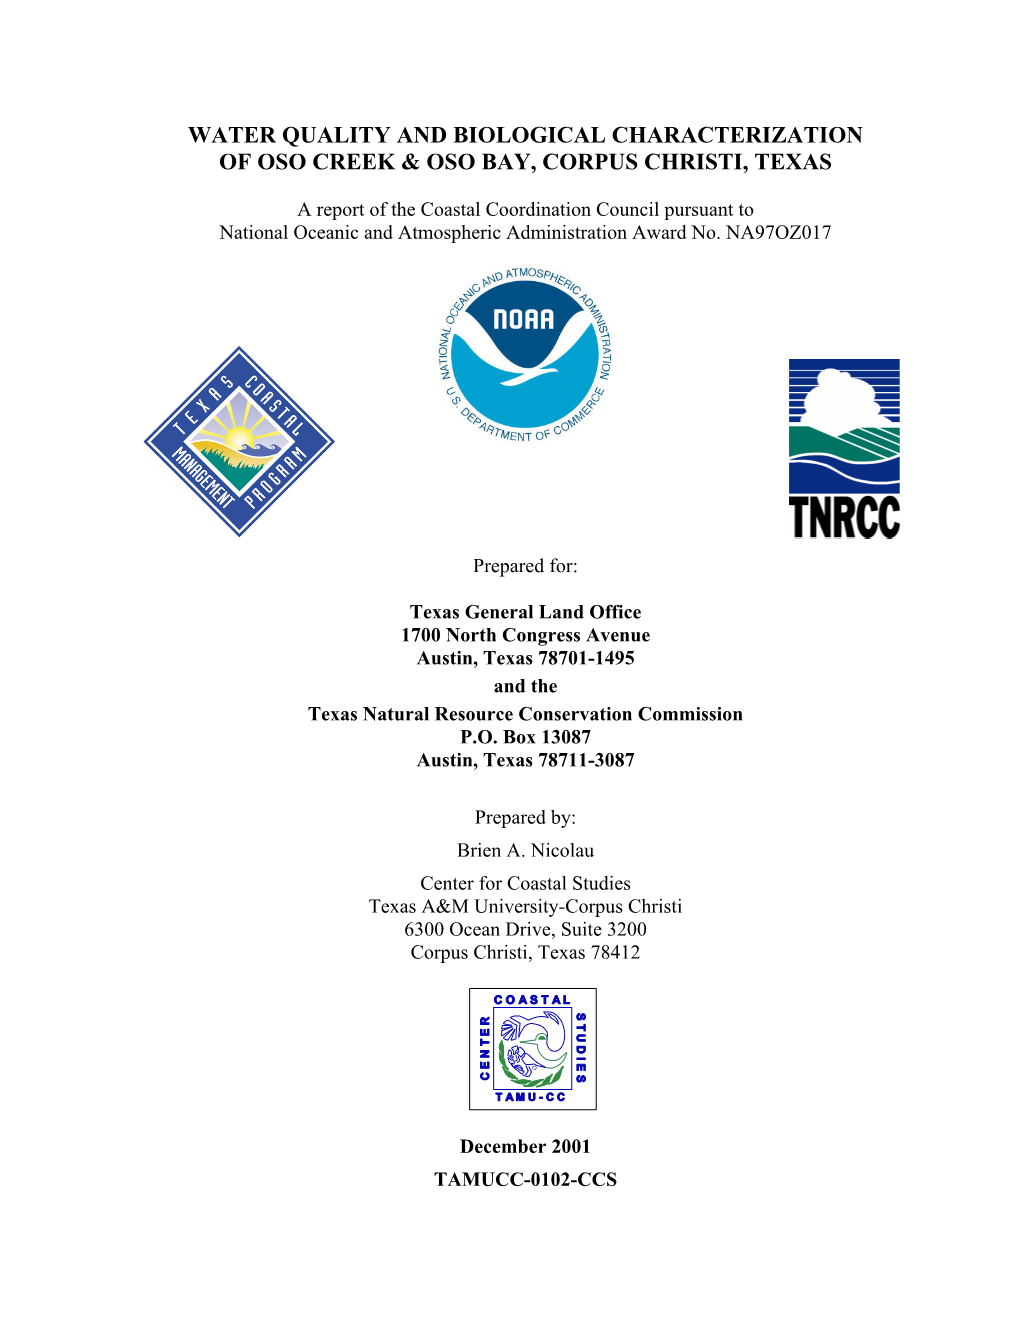 Water Quality and Biological Characterization of Oso Creek & Oso Bay, Corpus Christi, Texas